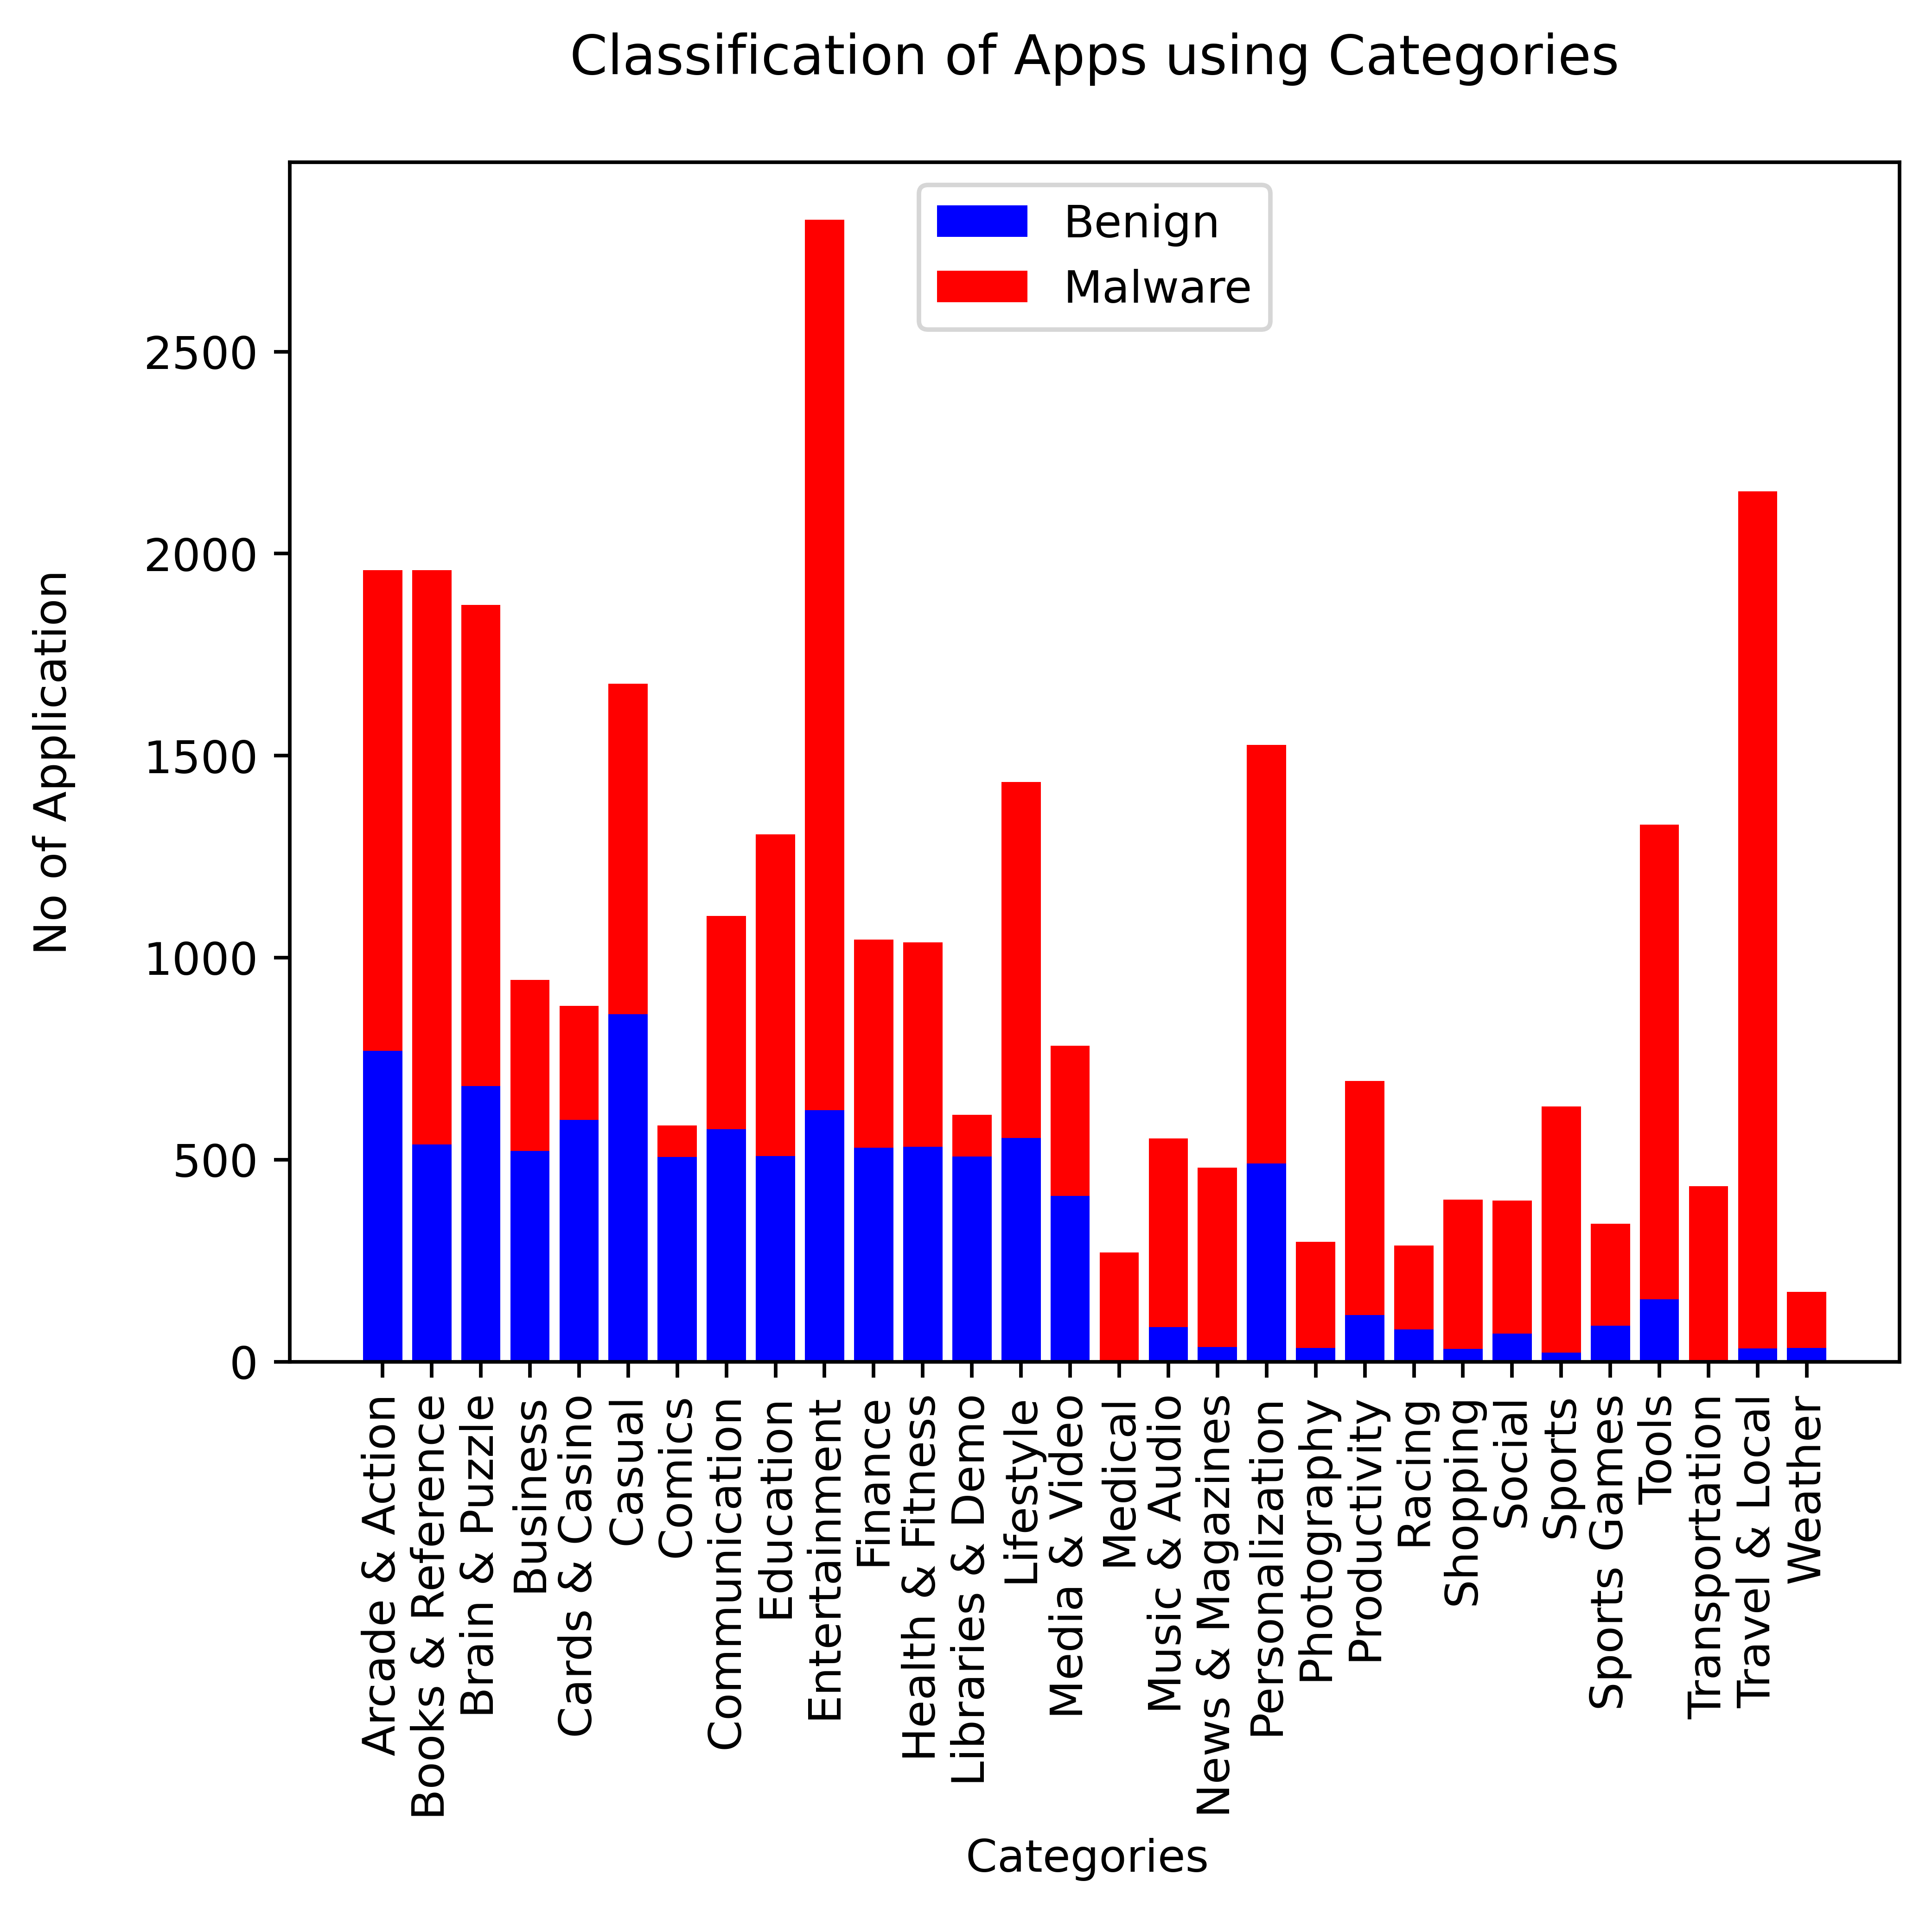 Classification of Apps using Categories